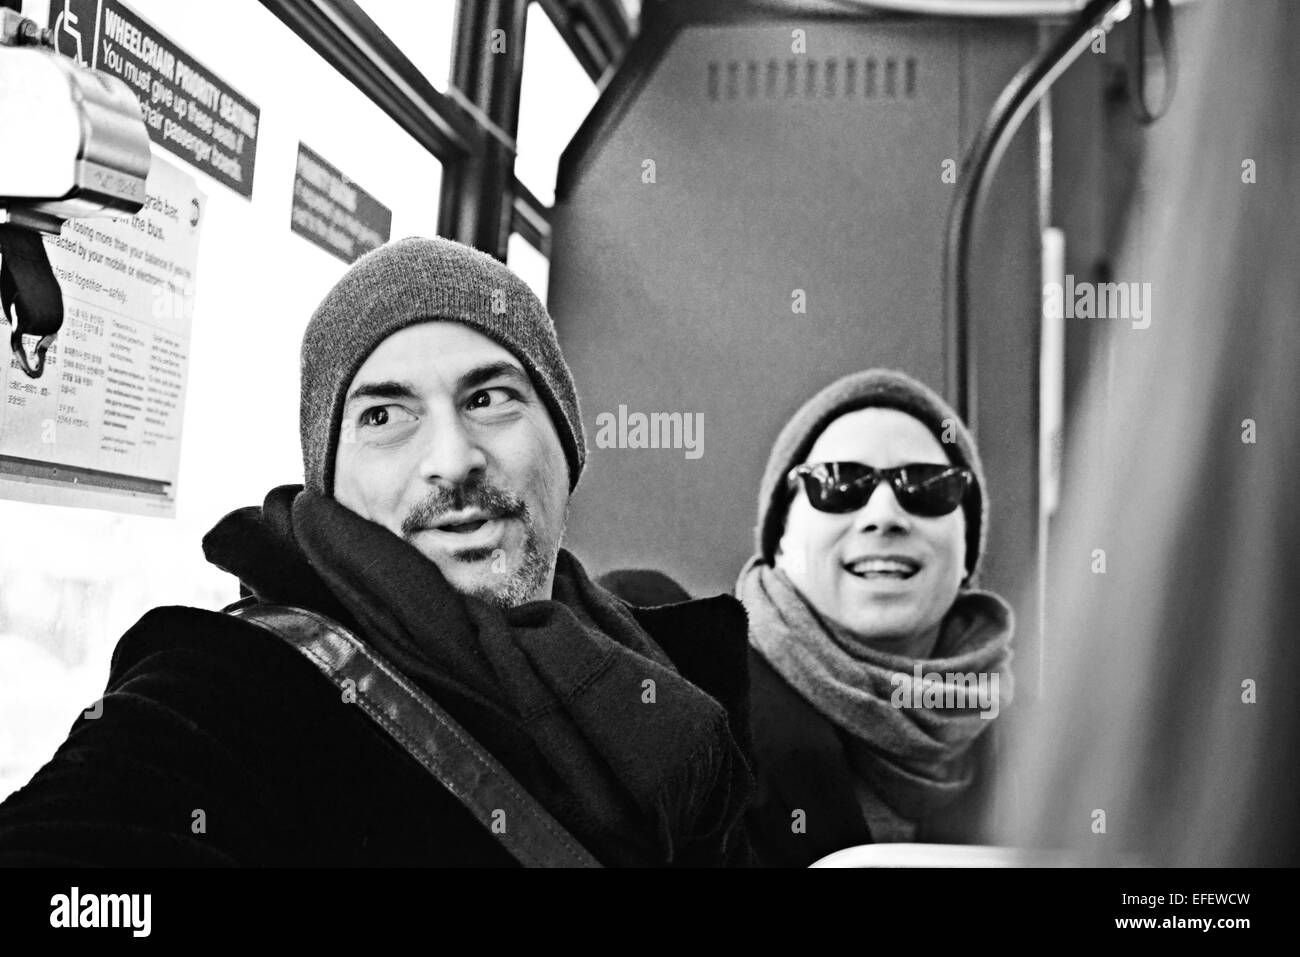 Two men sitting on bus laughing and talking in BW Stock Photo